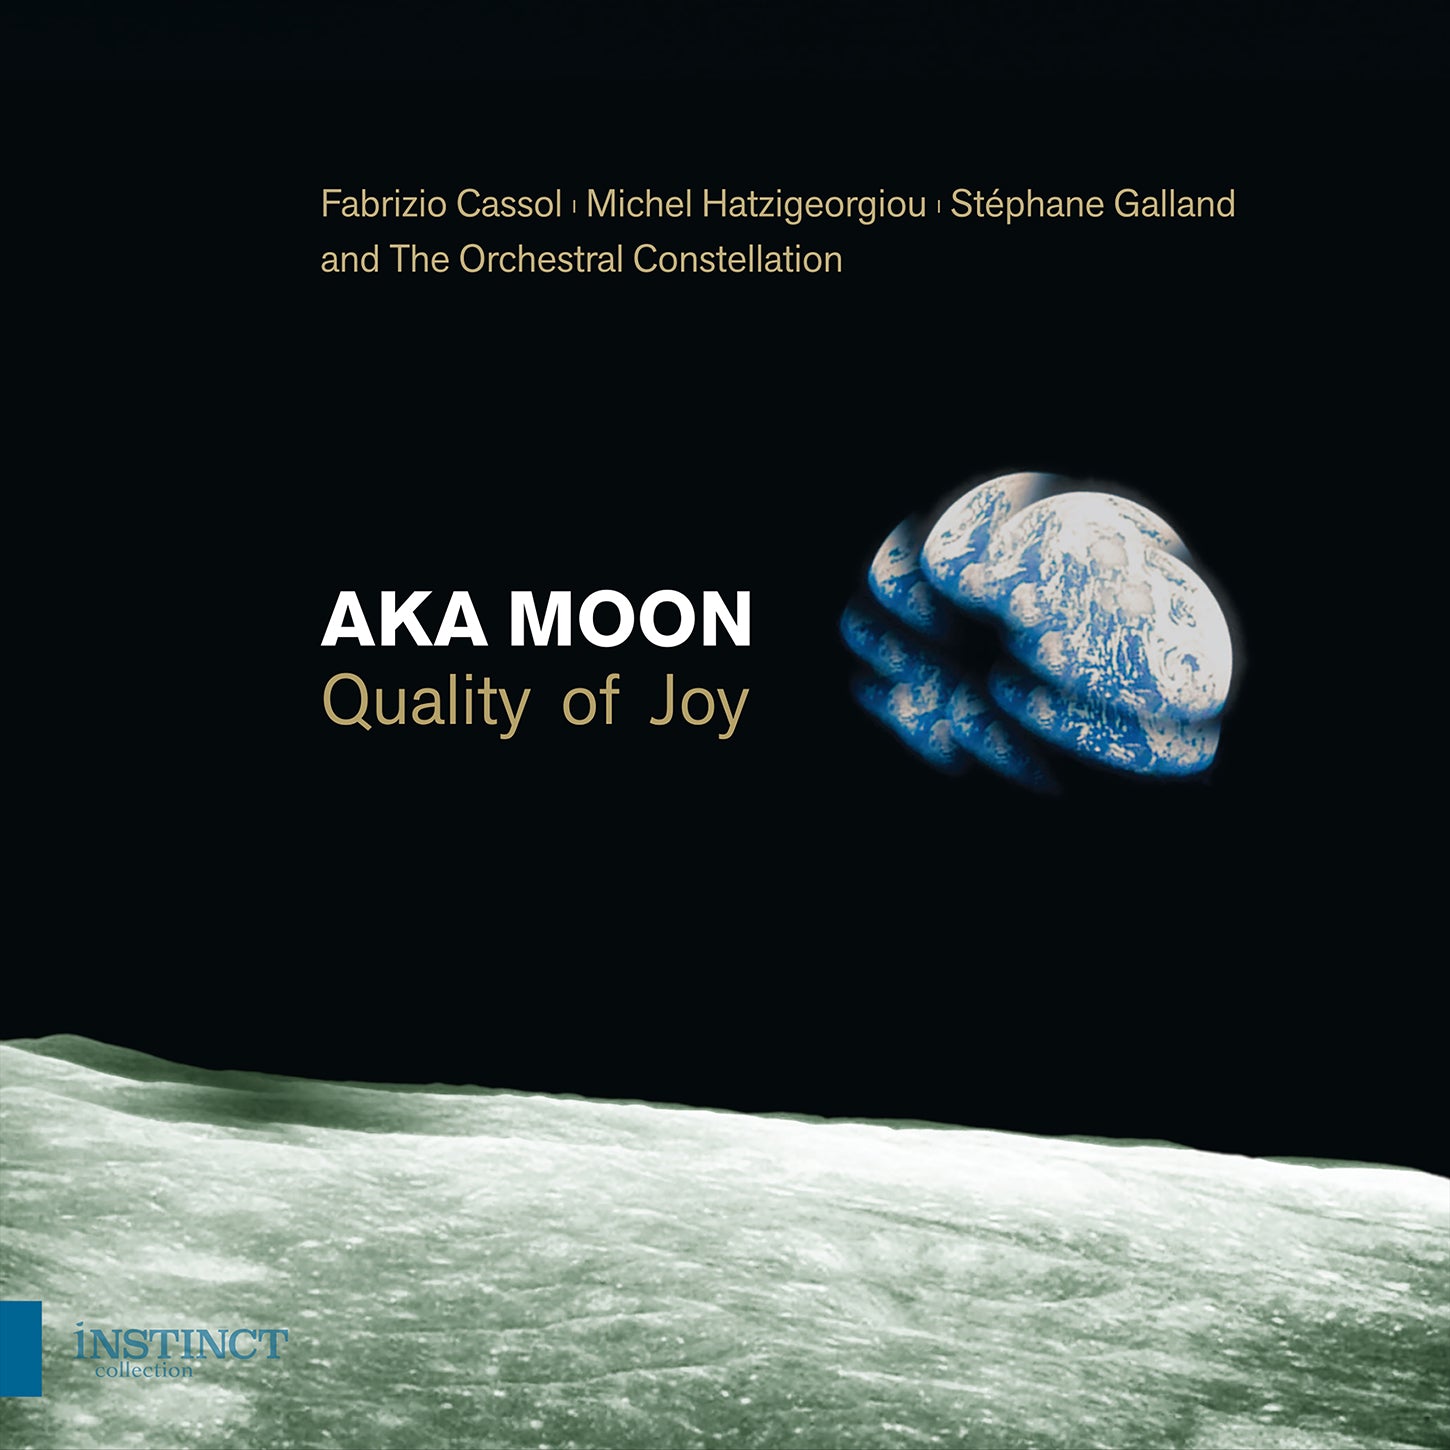 Cassol: Quality of Joy / Aka Moon, The Orchestral Constellation